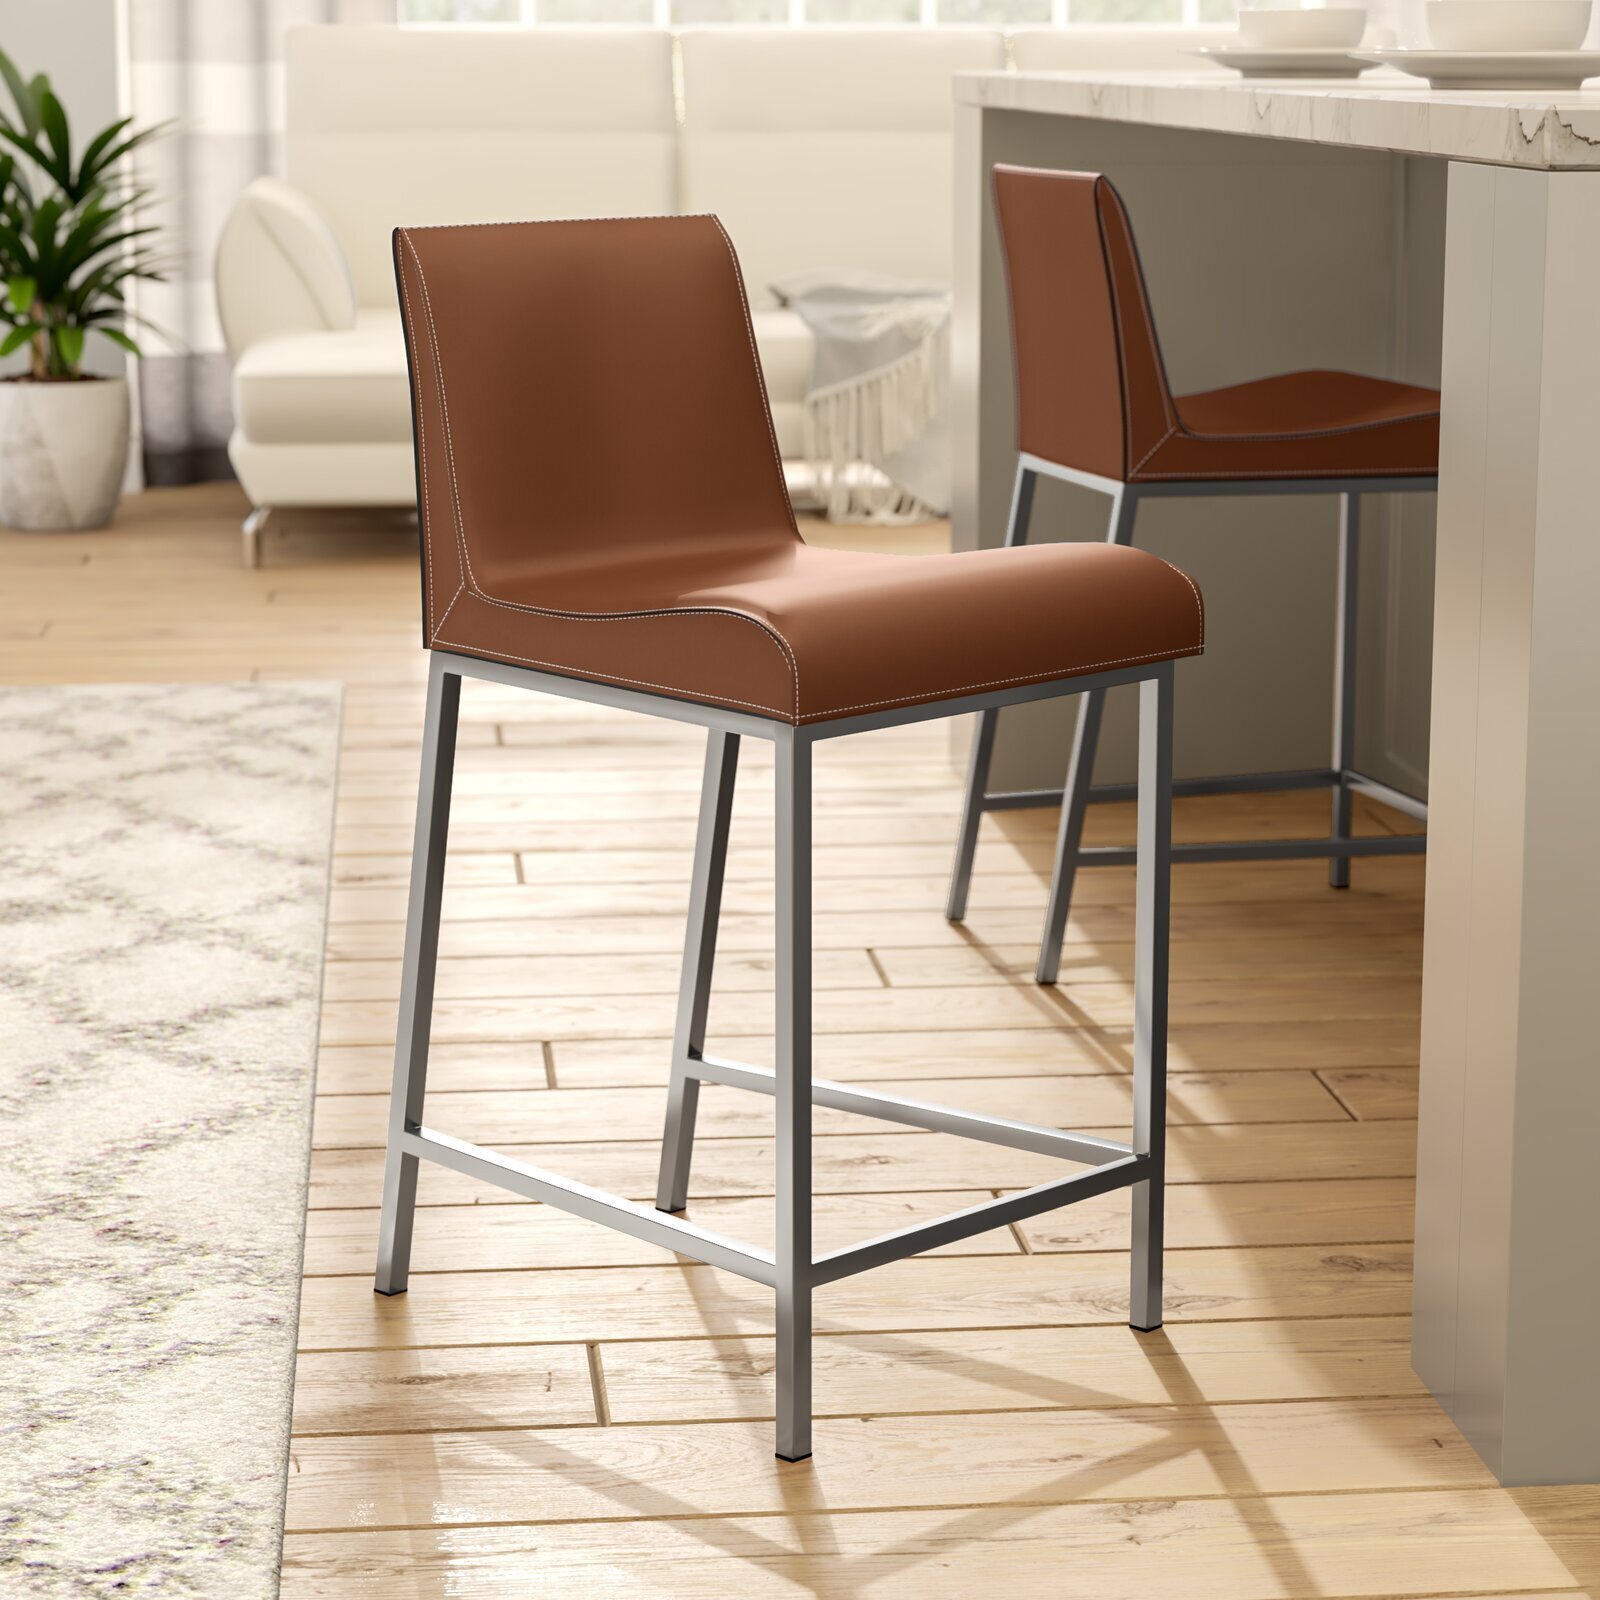 Counter Stools with Contemporary Style